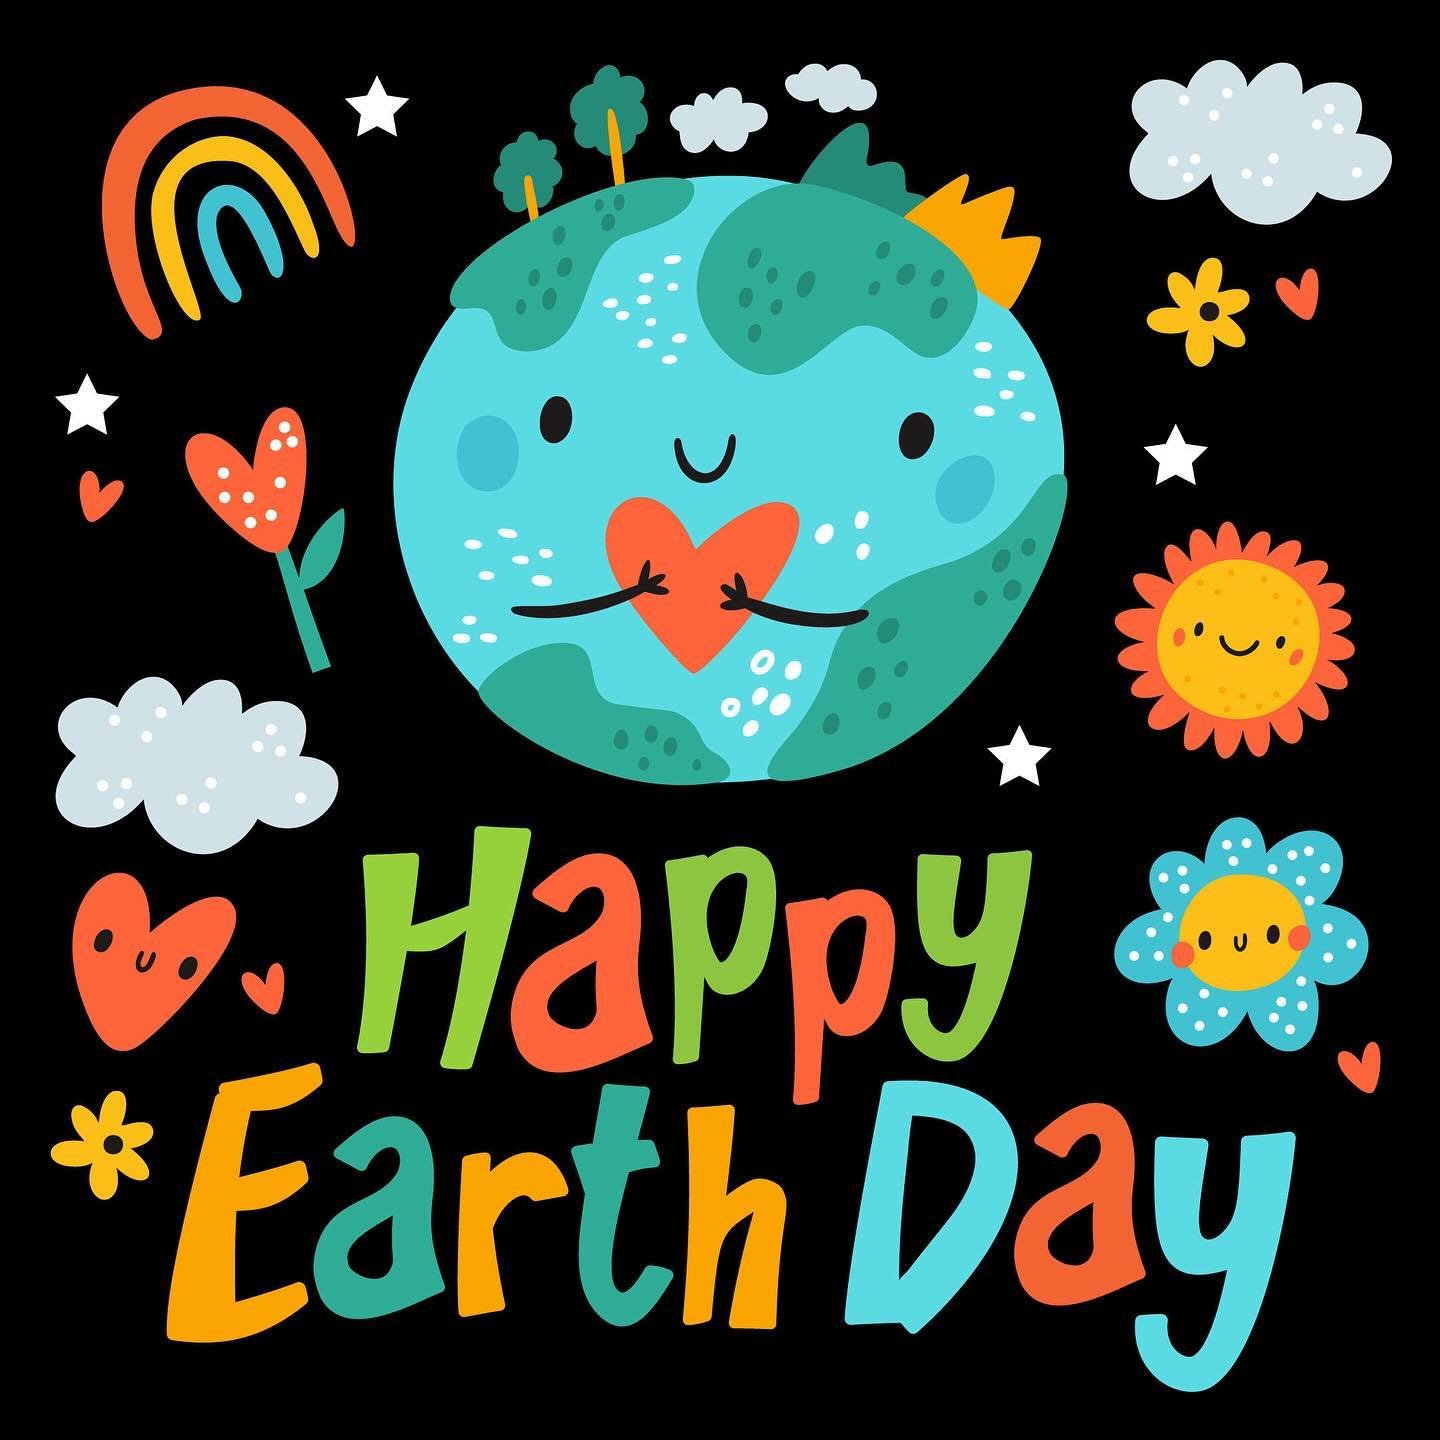 Happy Earth Day! 💙🌎💚